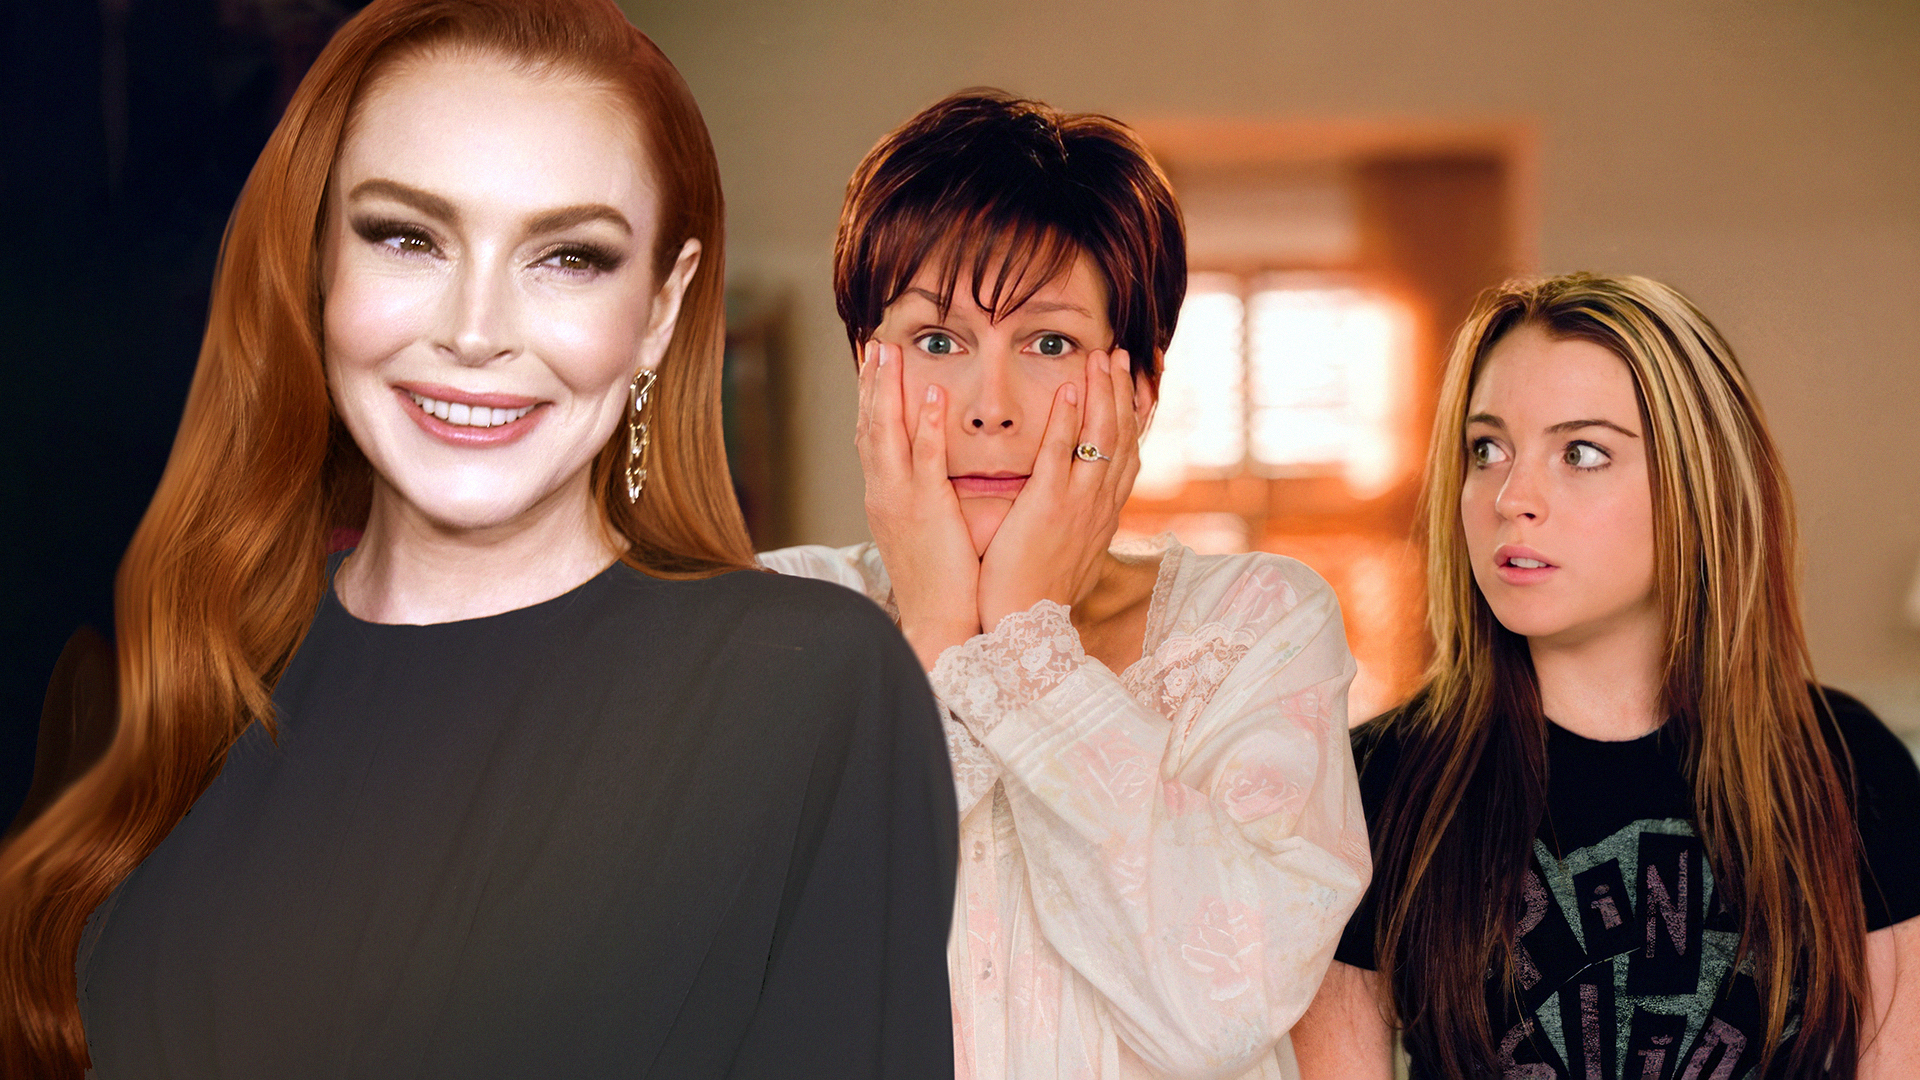 The Highly-Anticipated Freaky Friday Sequel Is 'In the Process,' Lindsay Lohan Says